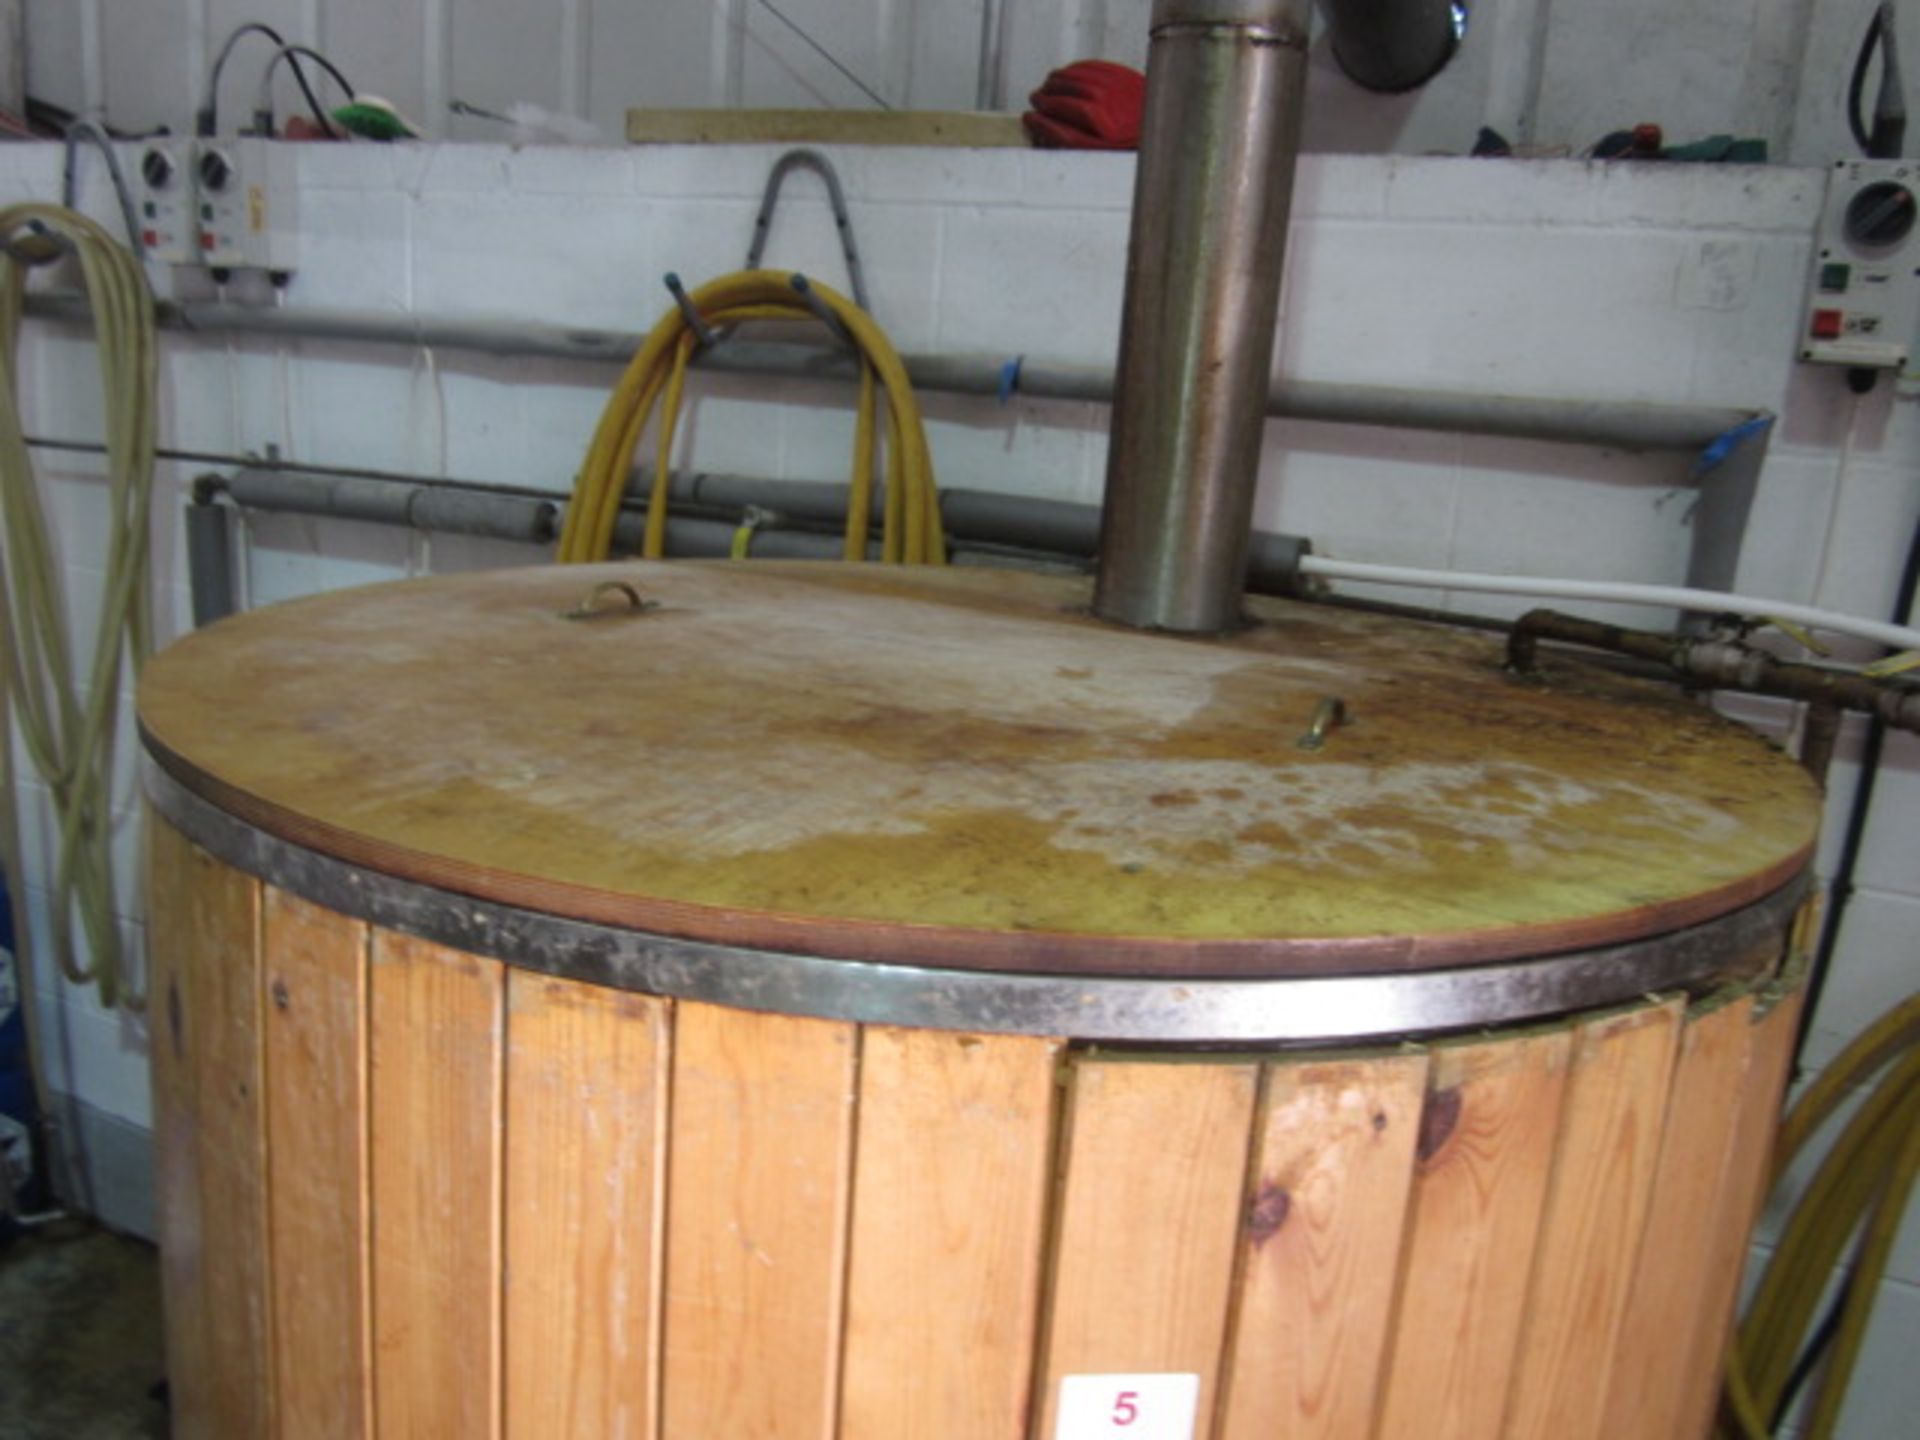 PBC Brewery Solutions stainless steel timber clad copper tank, for 6 barrel brewing system on stand, - Image 2 of 2